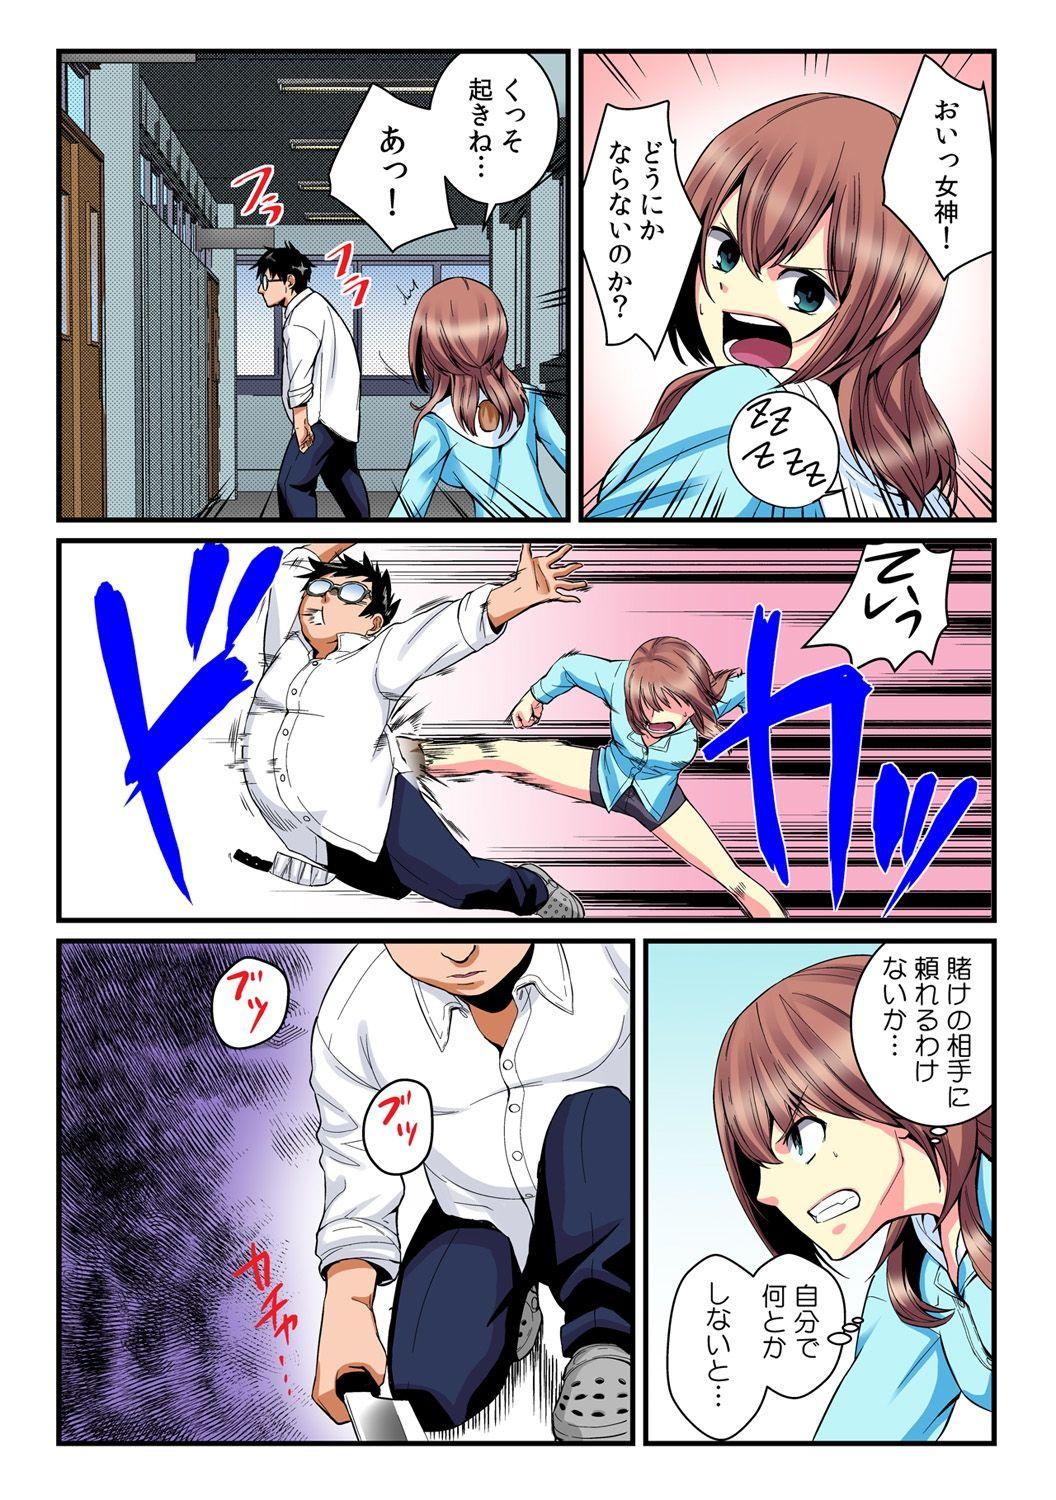 [Akagi Gijou / Akahige] I became a girl- and I definitely can't let anyone find out! (Full color) 2 20